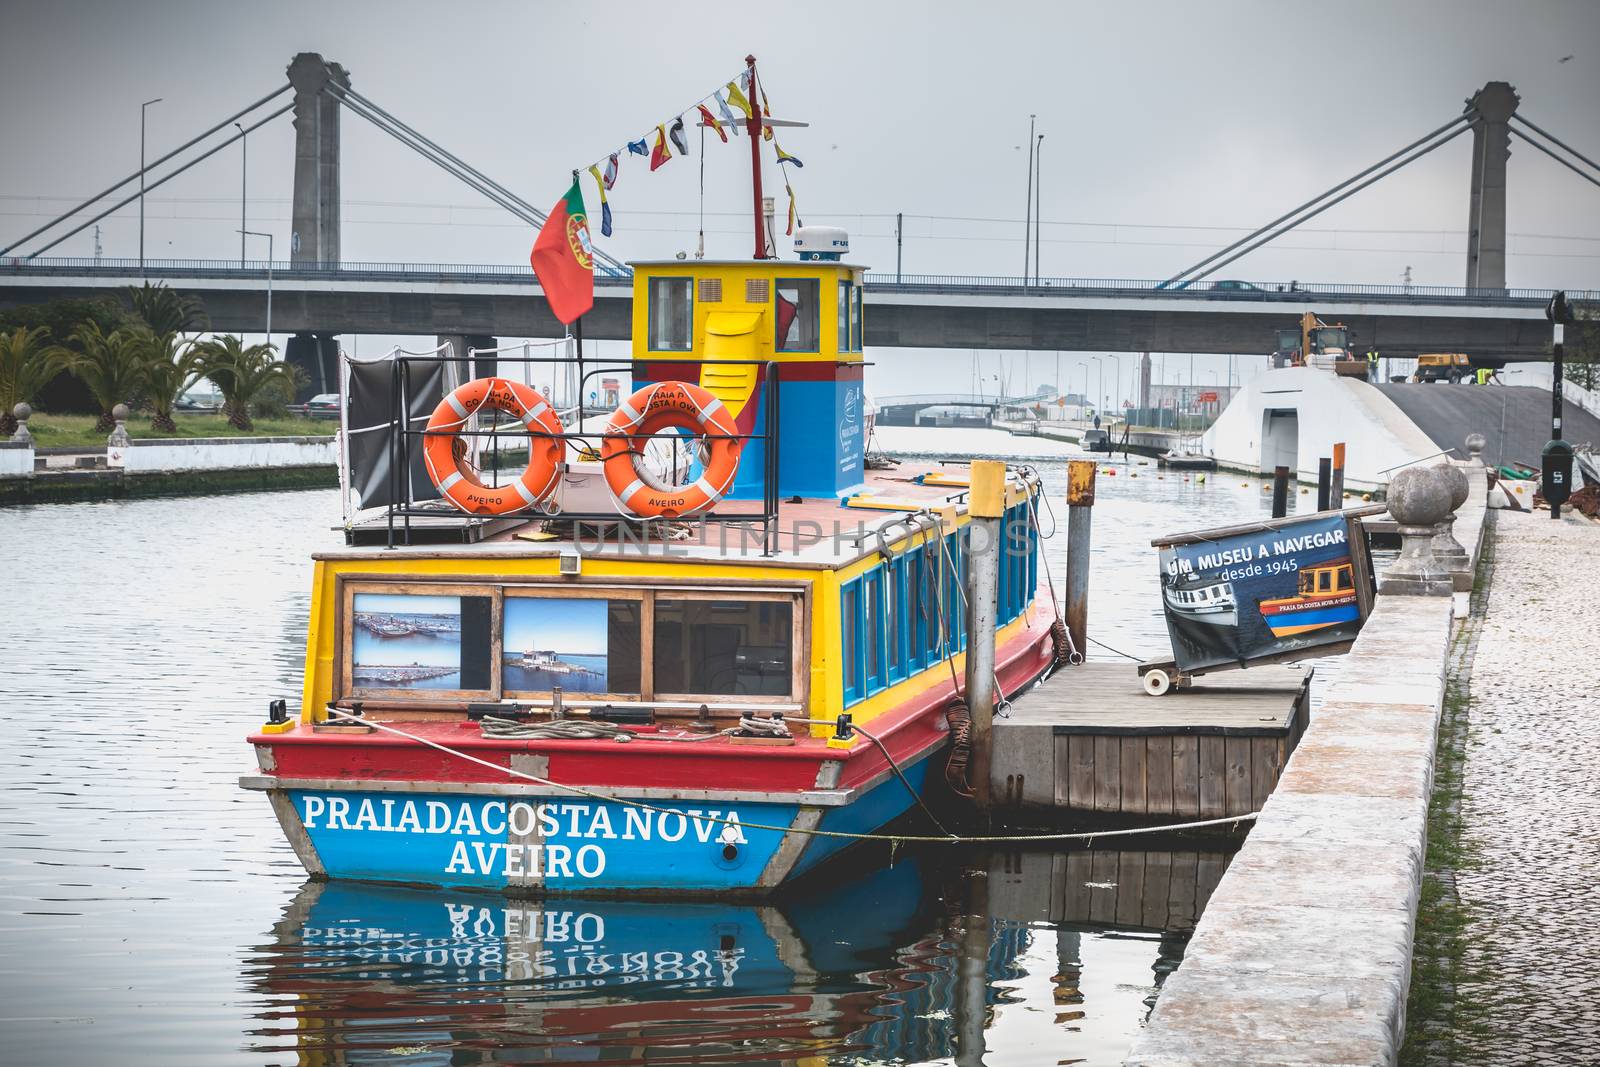 Aveiro, Portugal - May 7, 2018: Tourist transport boat docked at the end of the day on a spring day